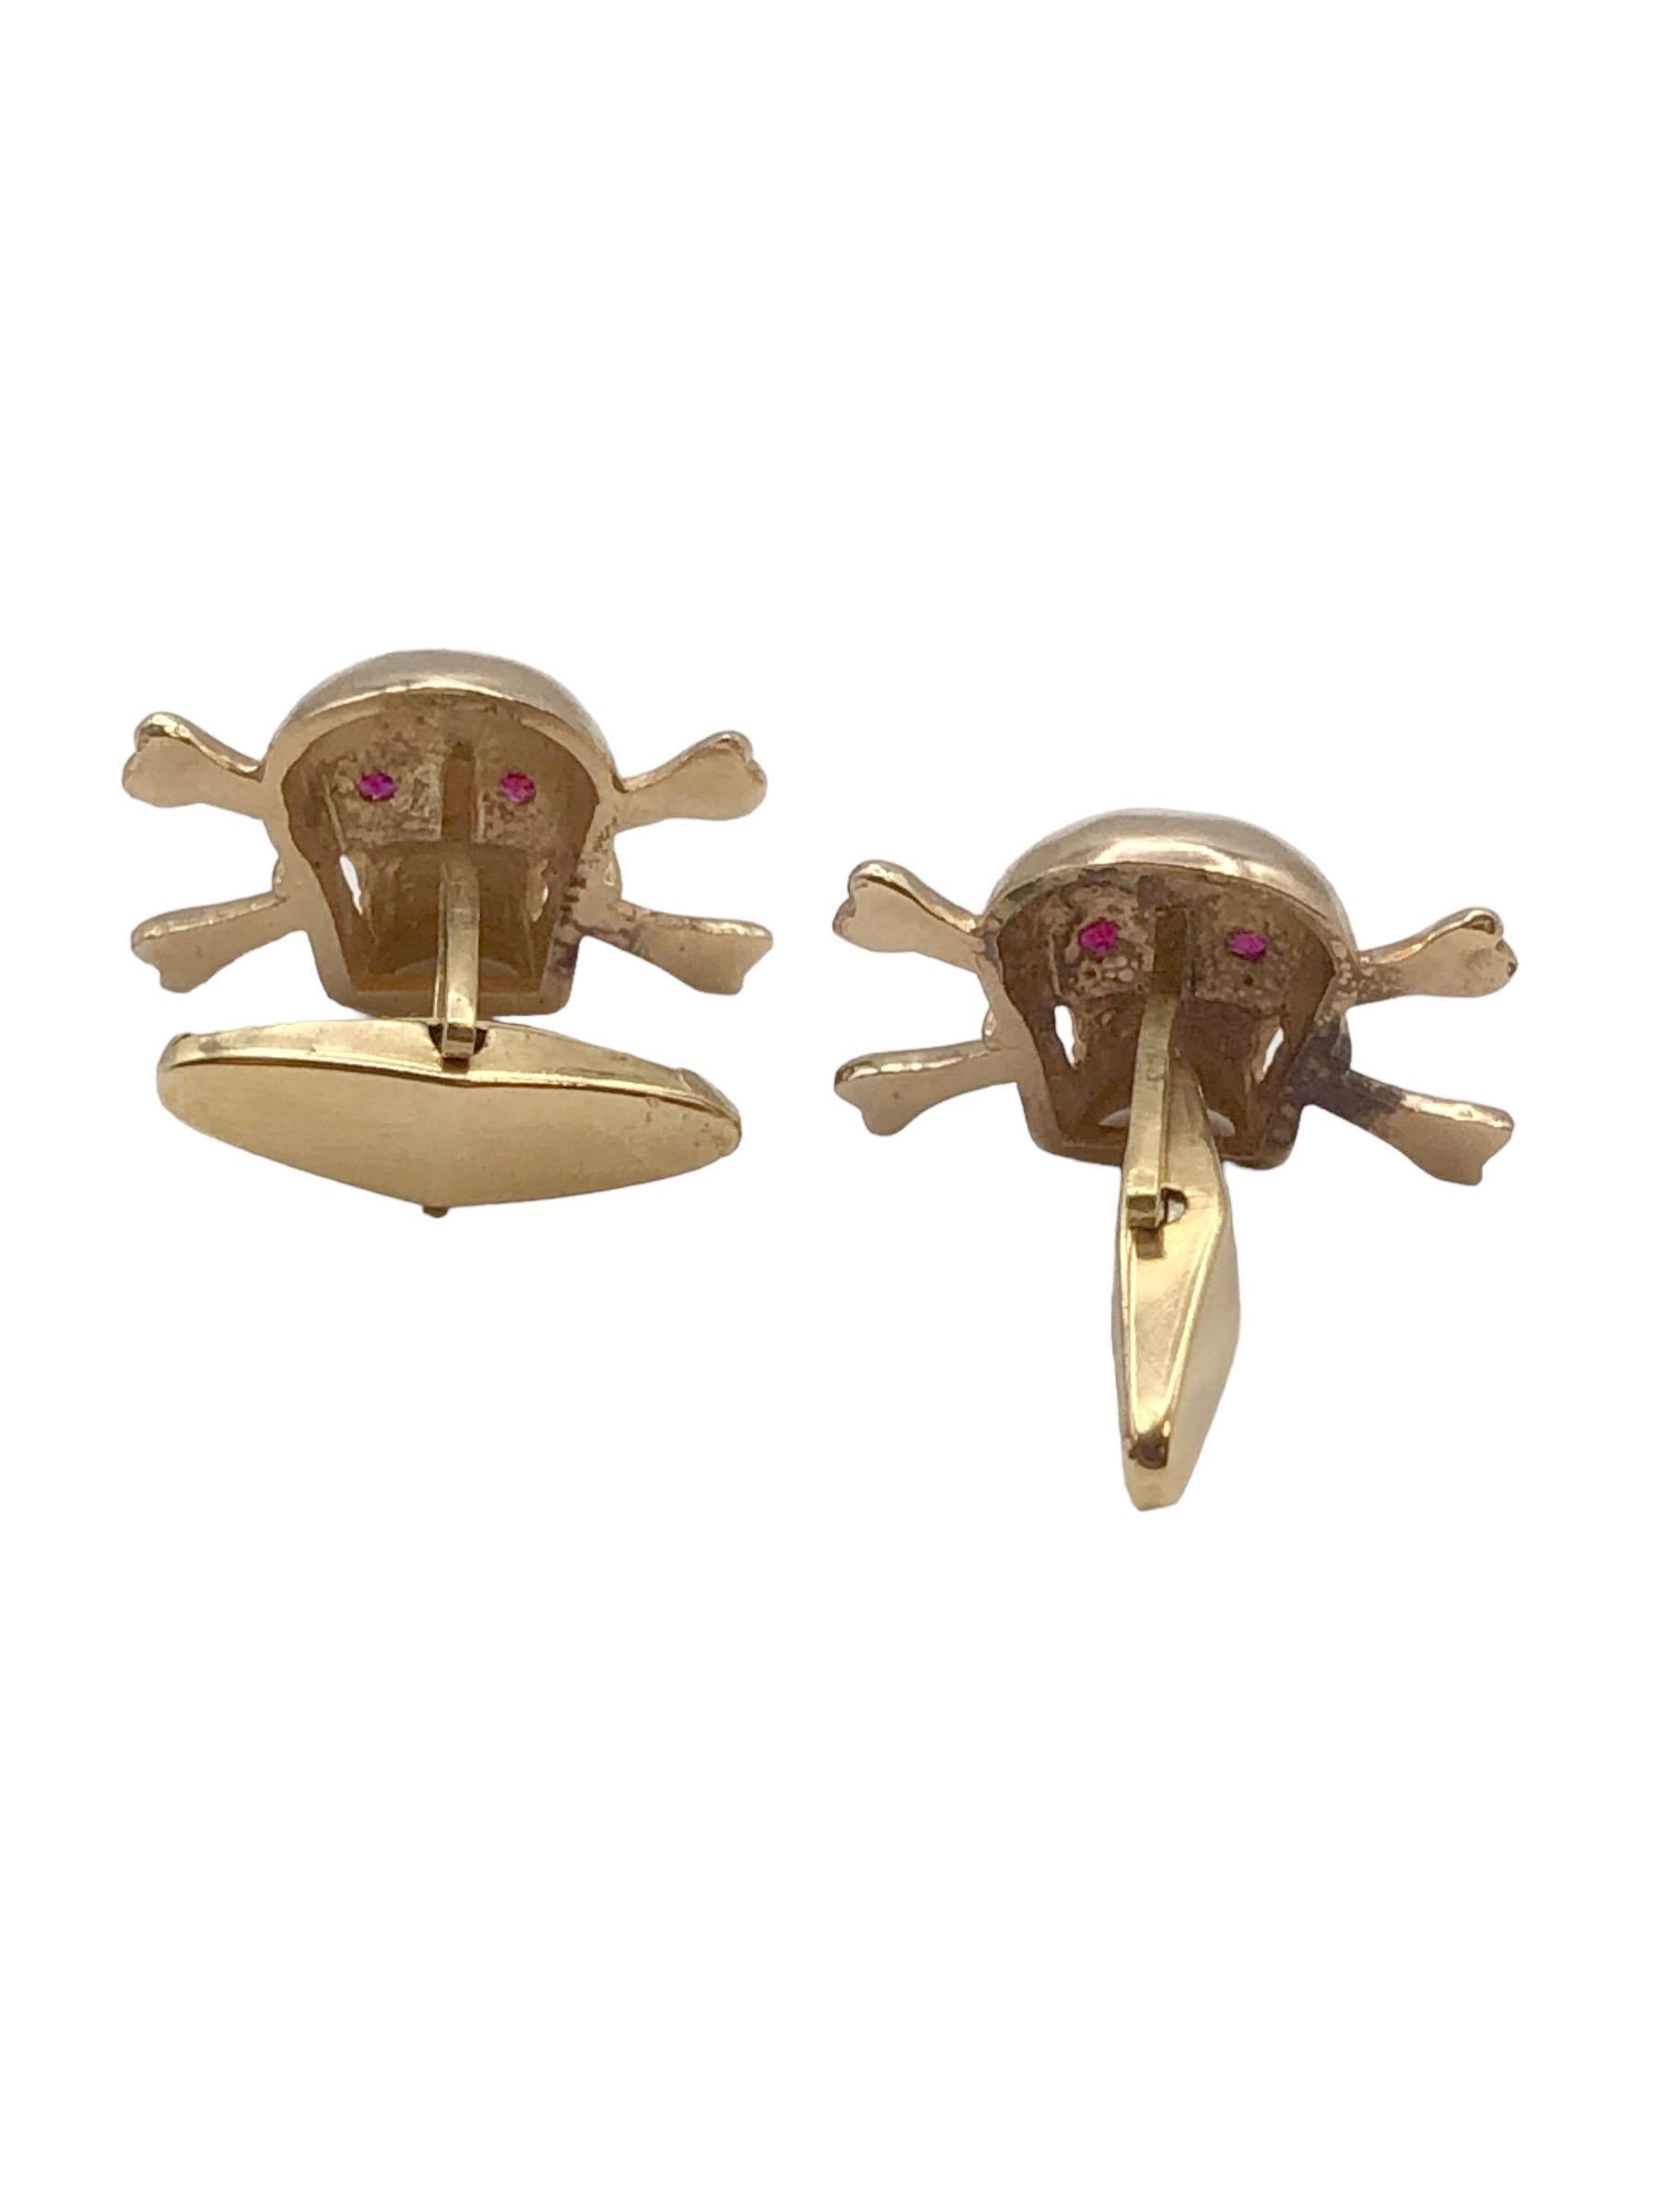 Circa 1970s 18k Yellow Gold Skull and Crossed Bones Cufflinks, measuring 5/8 x 5/8 inch, nicely detailed with Ruby set Eyes. Toggle backs for easy on and off. 